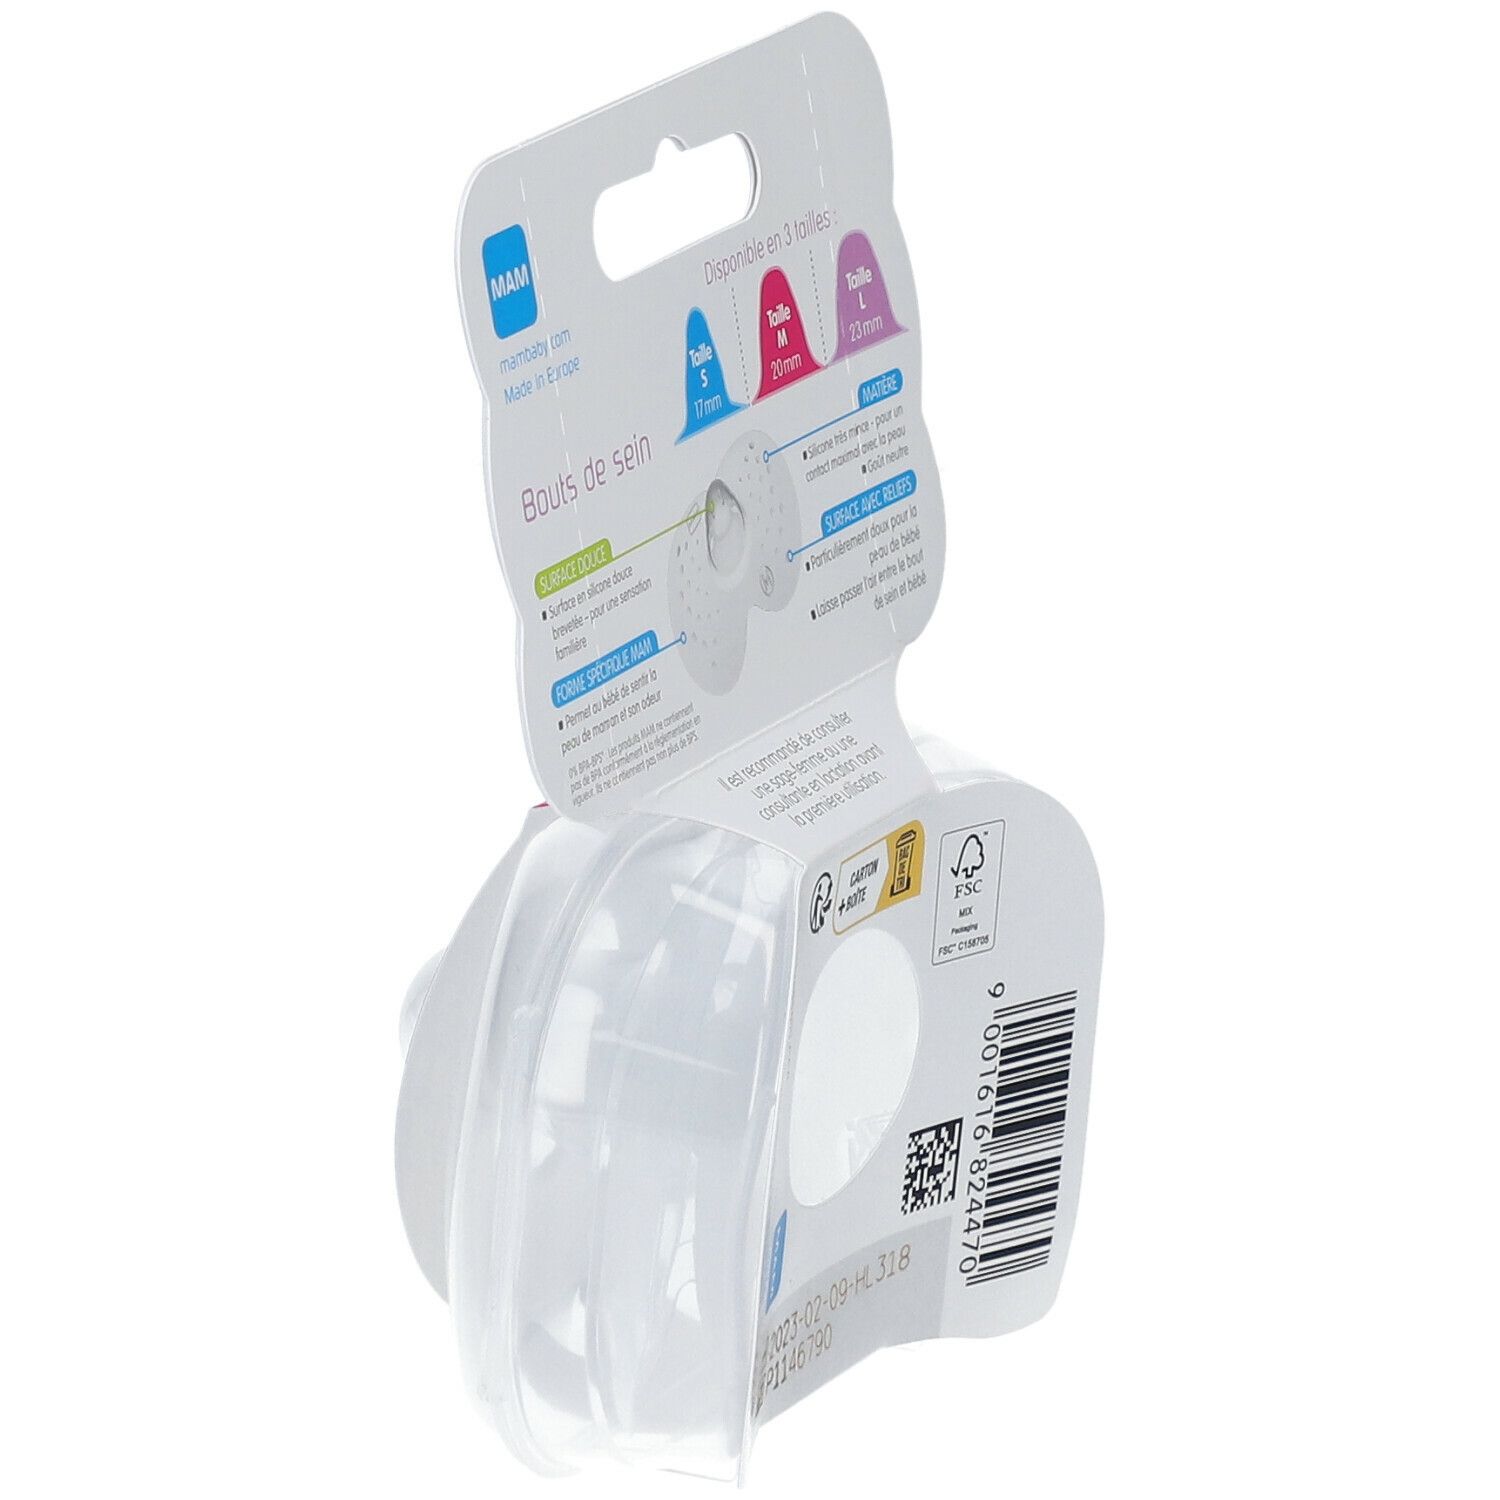 MAM Bout de sein x2, taille M 2 pc(s) - Redcare Pharmacie